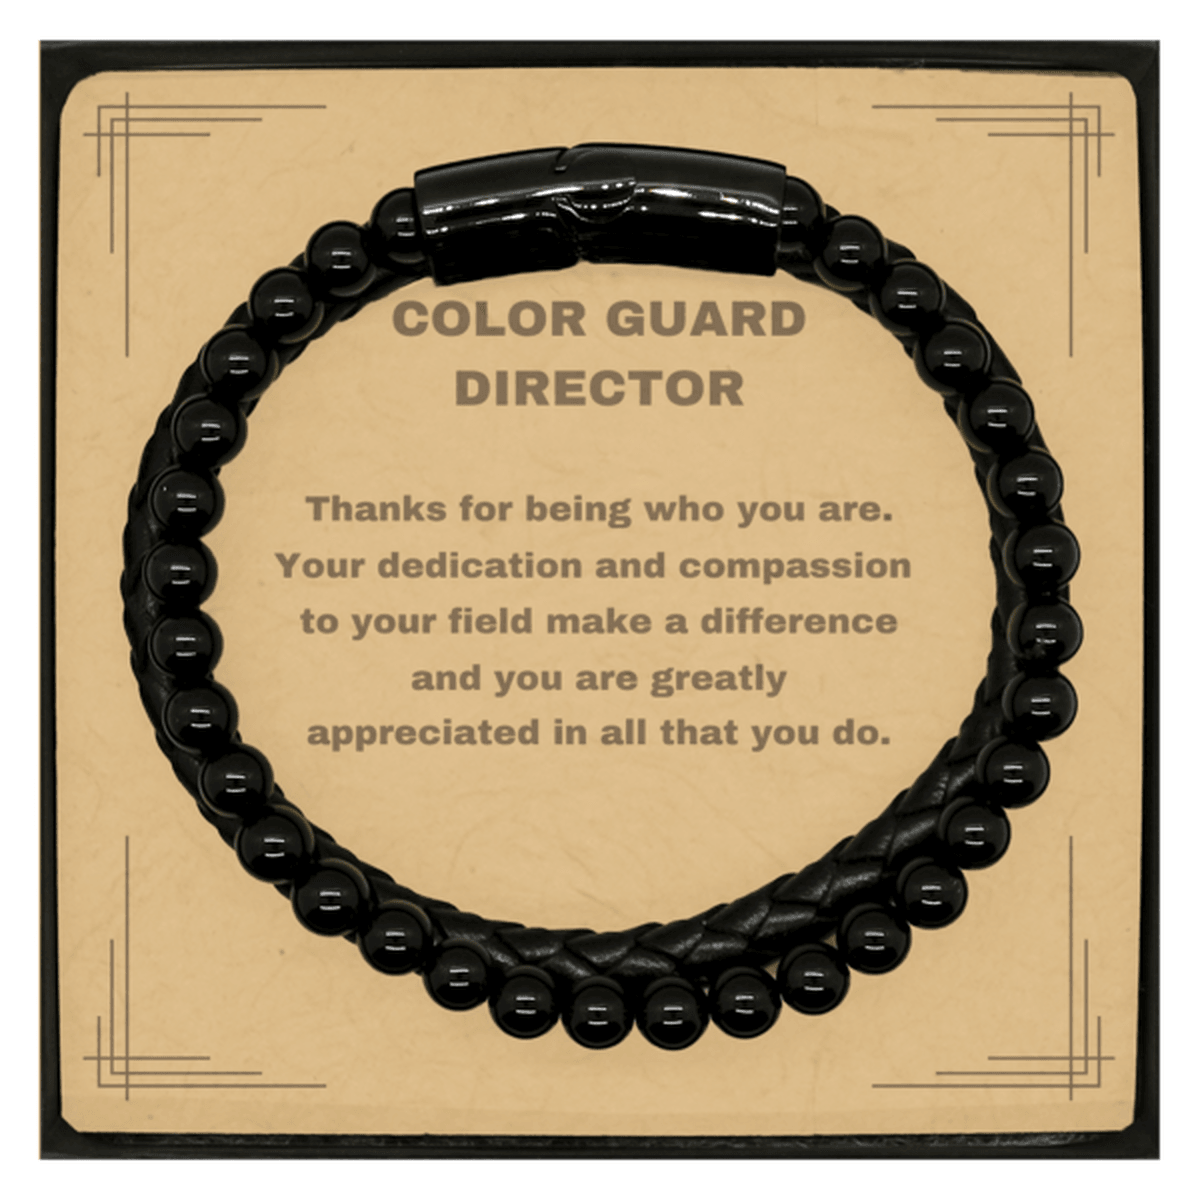 Color Guard Director Black Braided Leather Stone Bracelet - Thanks for being who you are - Birthday Christmas Jewelry Gifts Coworkers Colleague Boss - Mallard Moon Gift Shop